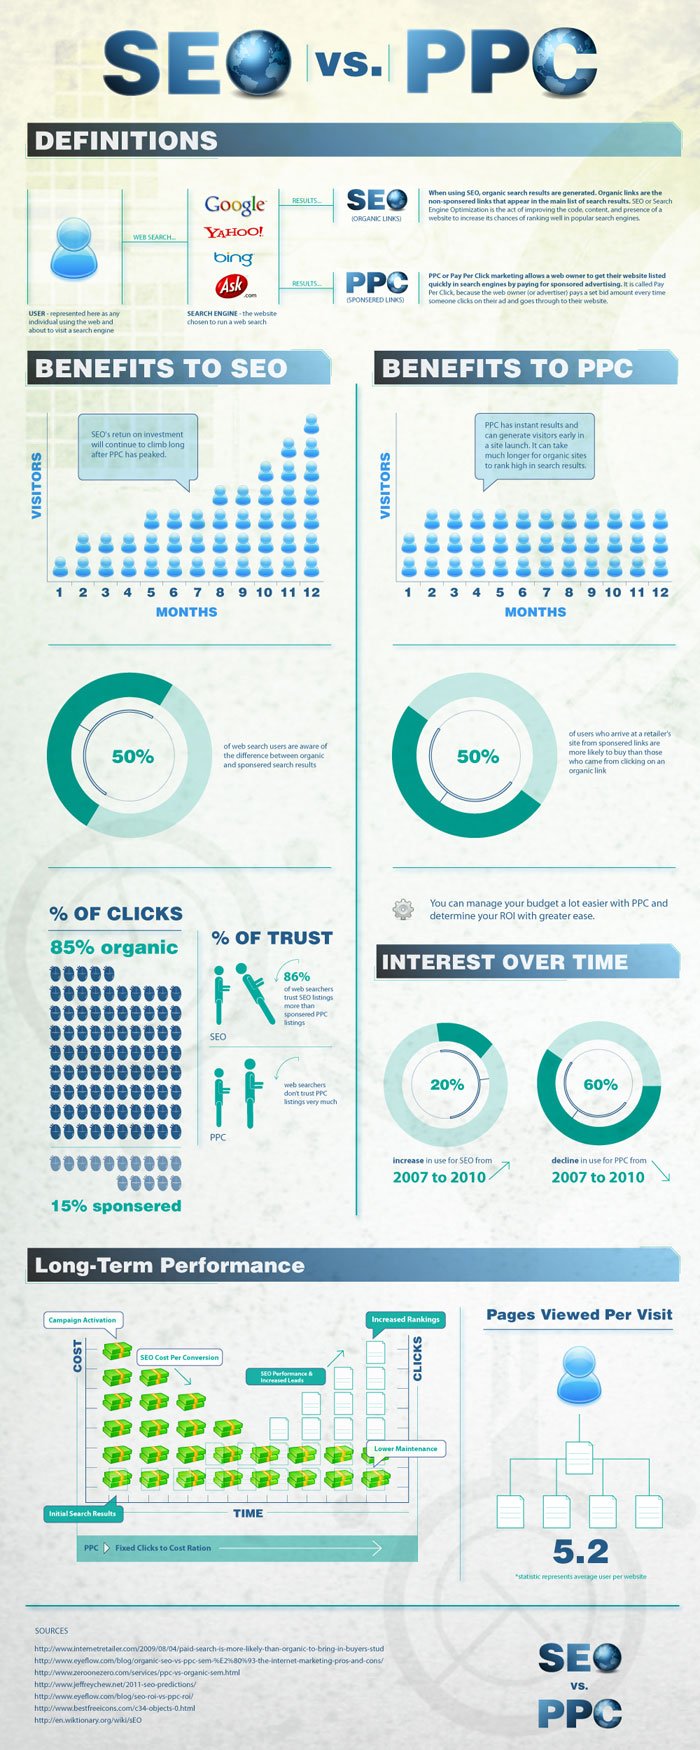 PPC vs. SEO Infographic by GuavaBox